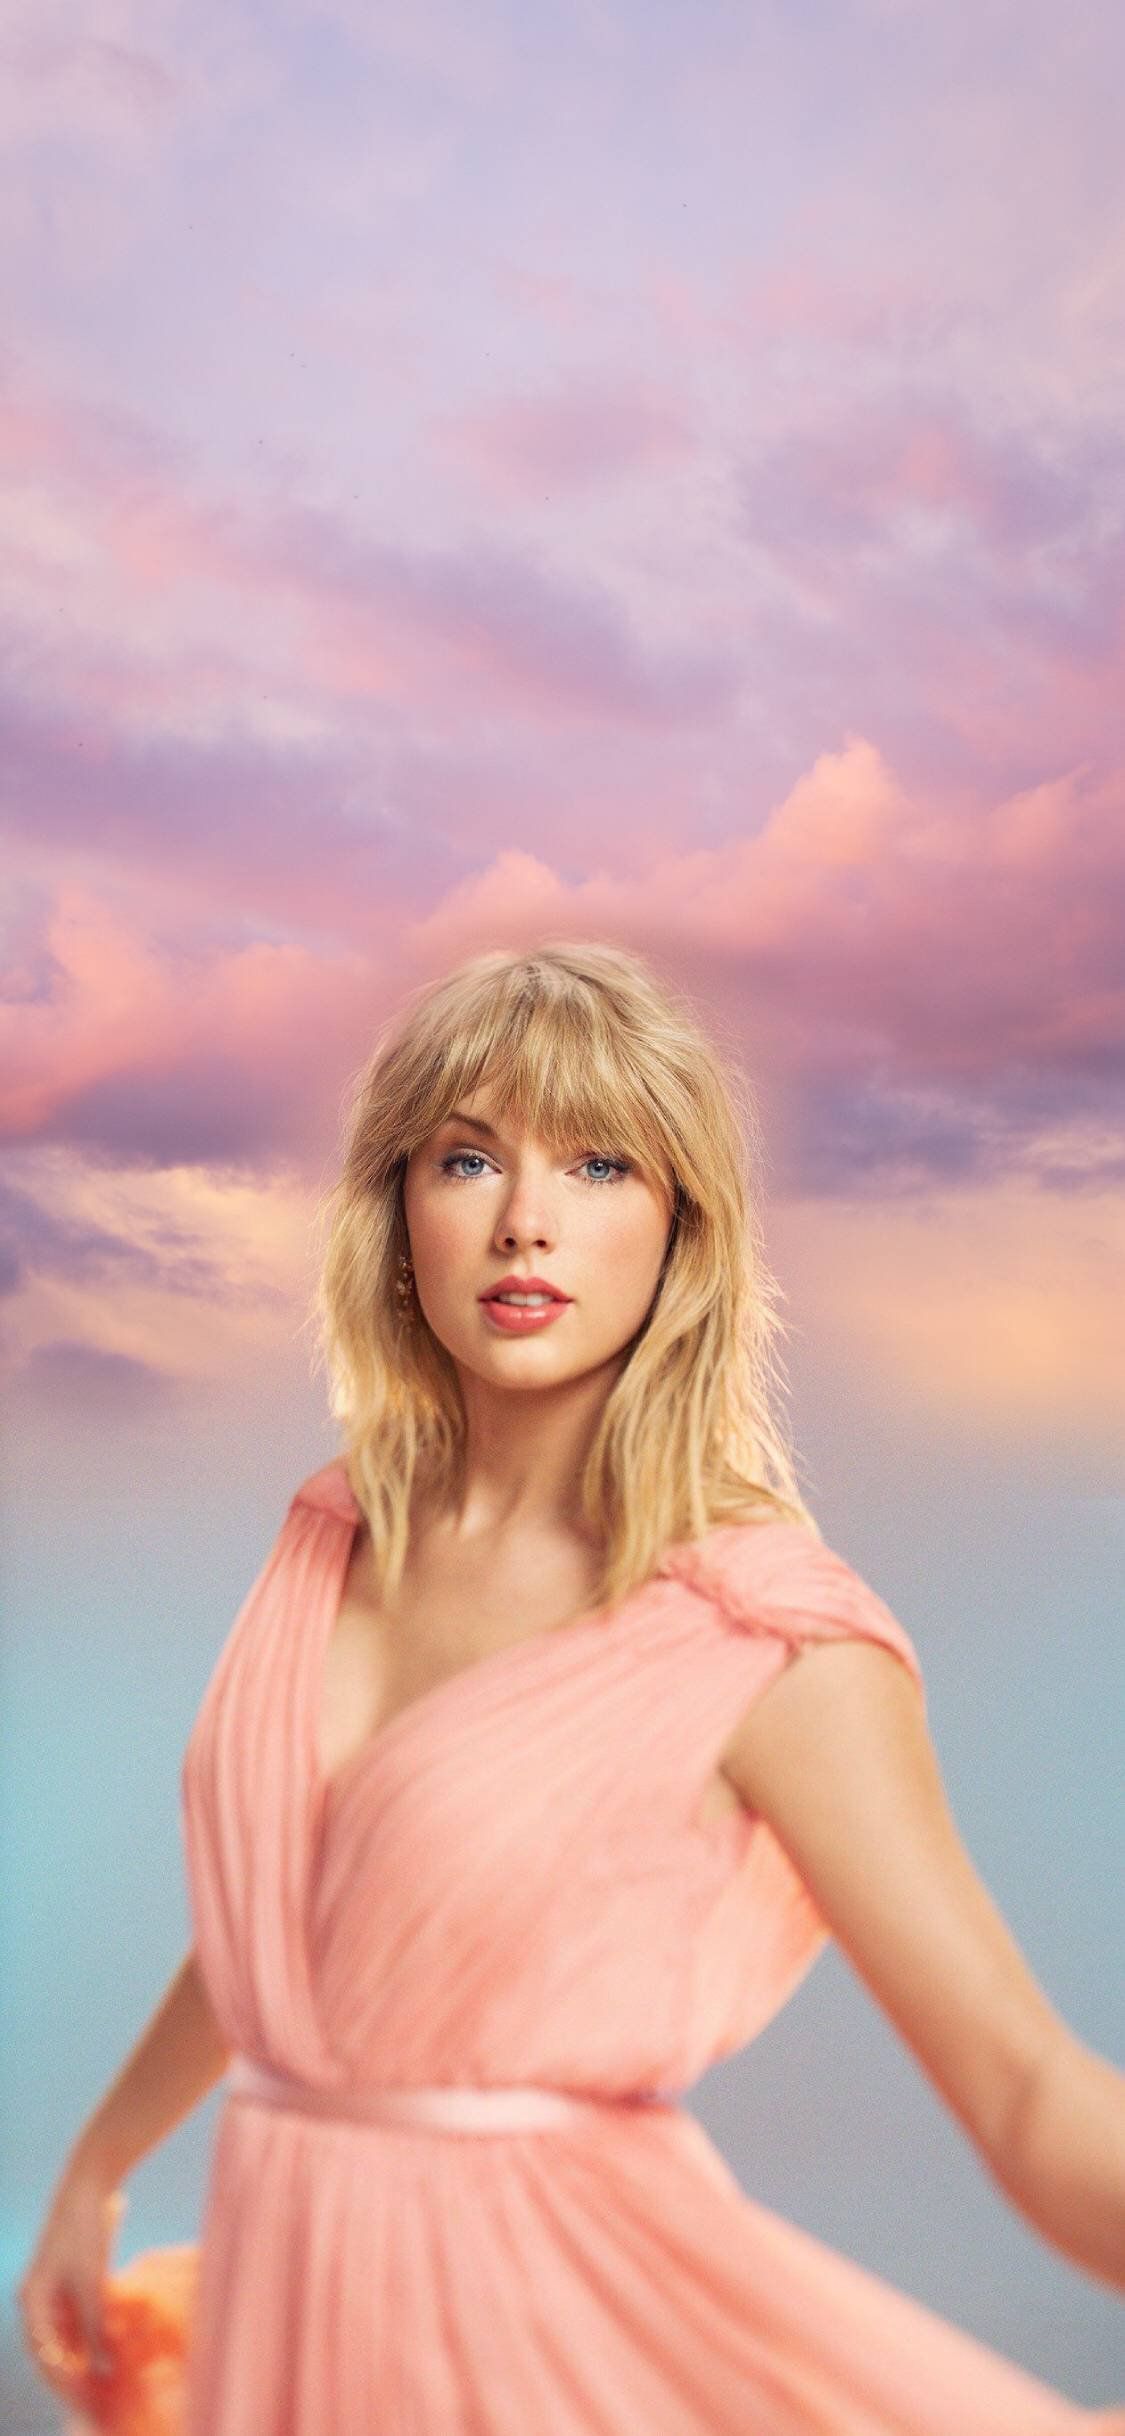 Taylor Swift Evermore Wallpapers - Wallpaper Cave